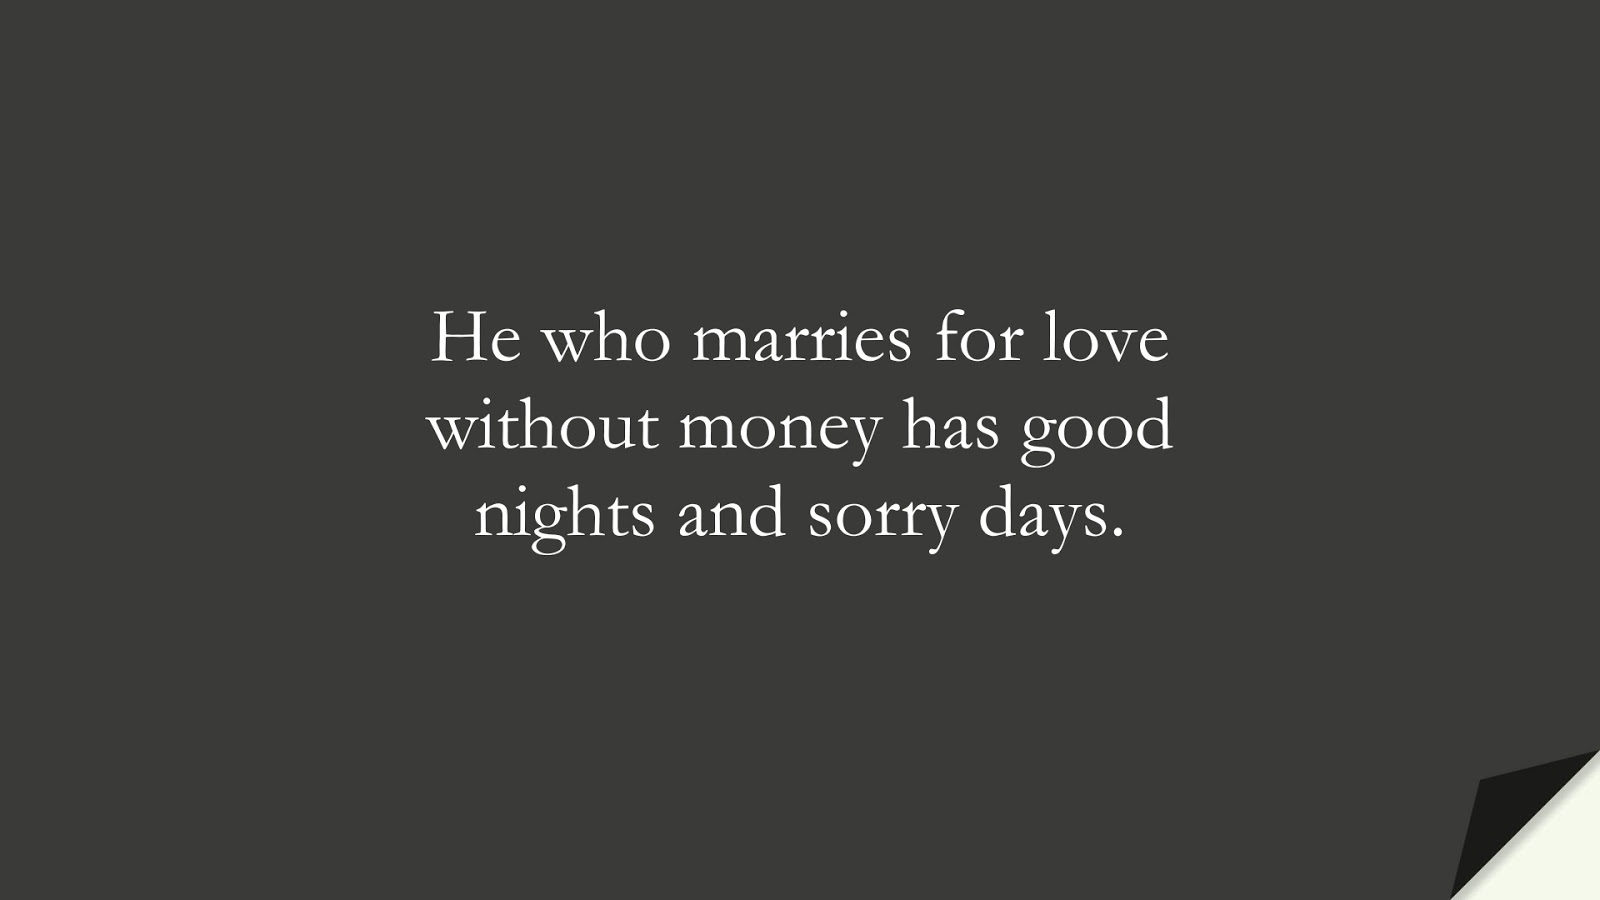 He who marries for love without money has good nights and sorry days.FALSE